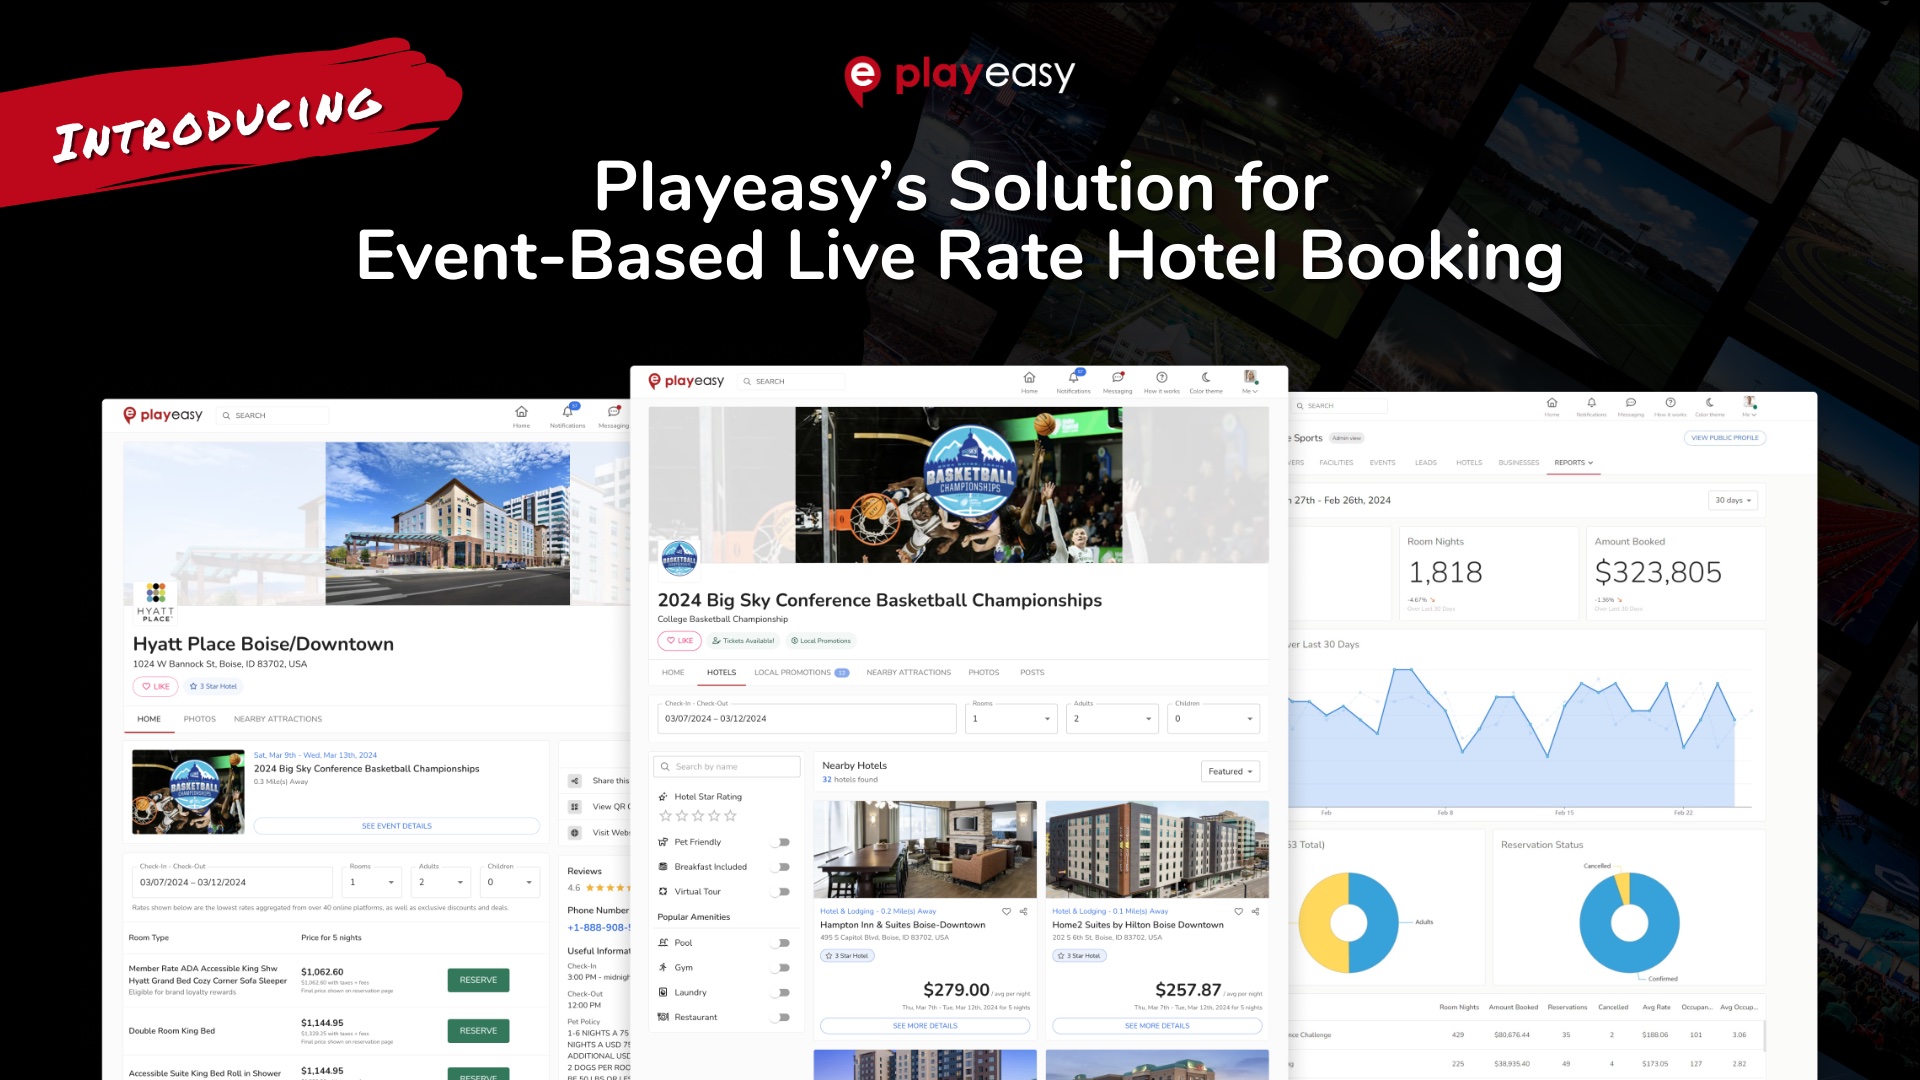 Playeasy’s Solution for Event-Based Live Rate Hotel Booking (featured image)